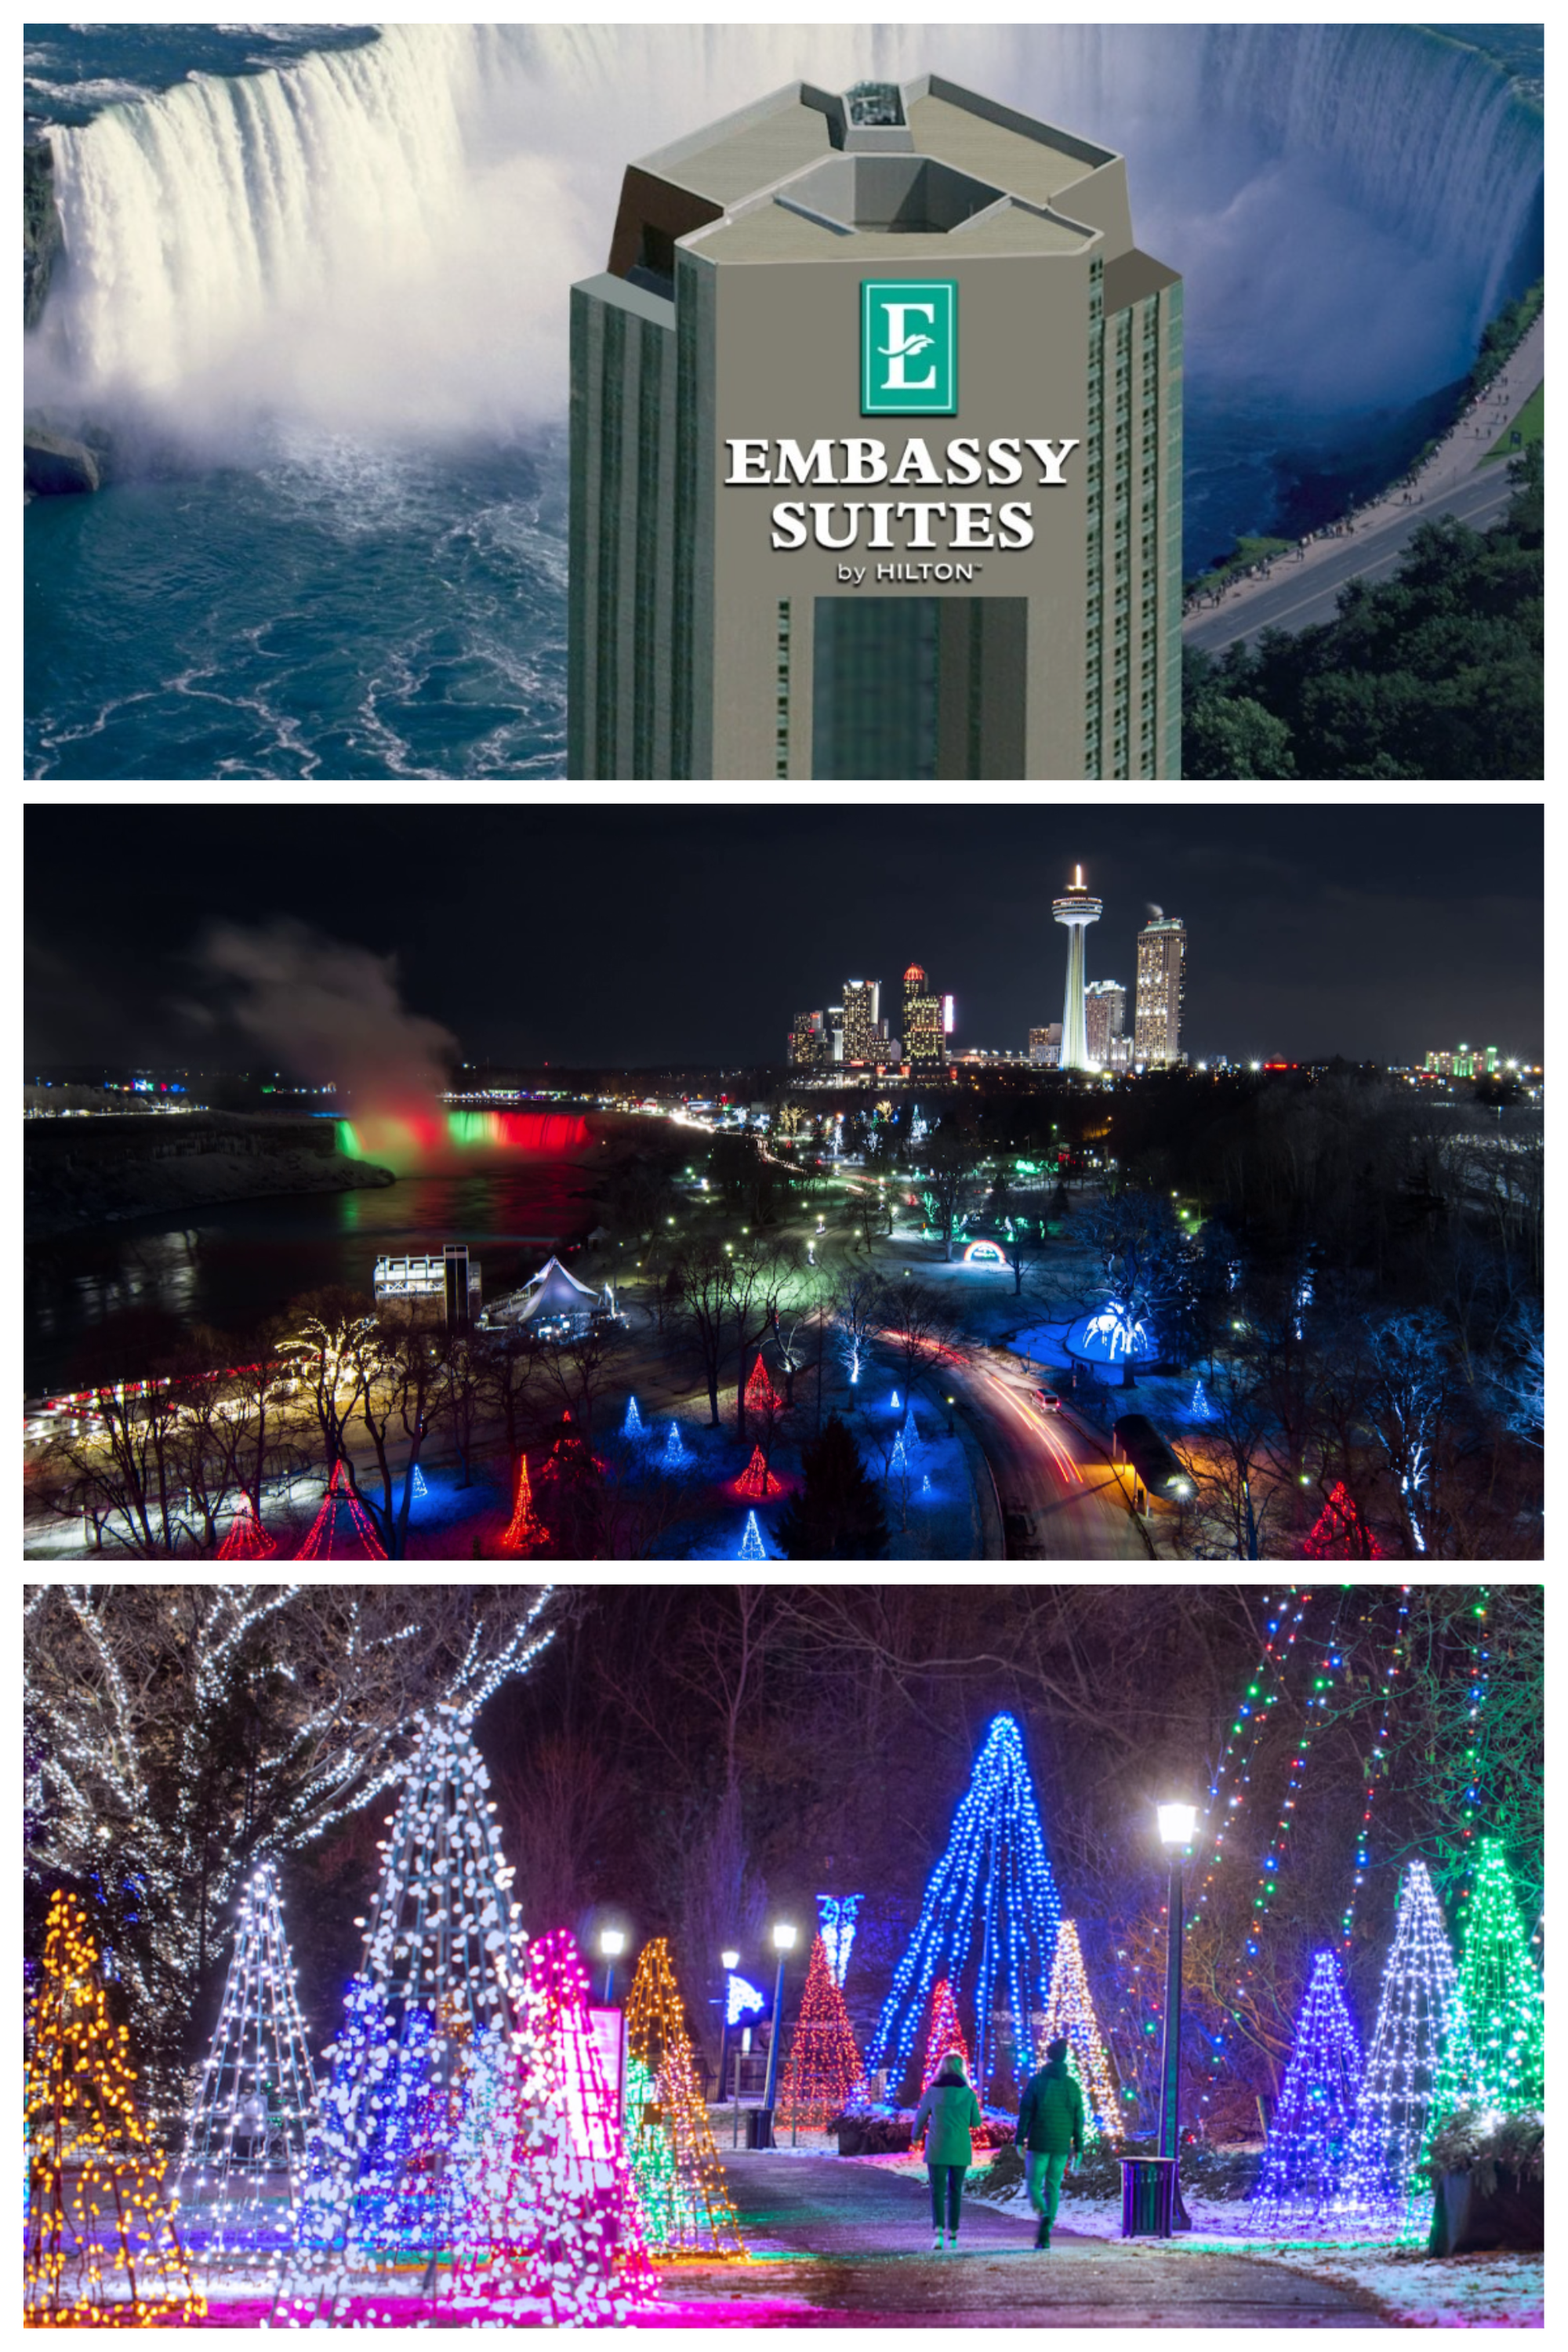 Niagara Falls Winter Festival Of Lights: Embassy Suites Hotel Offers Special Package With A Special View